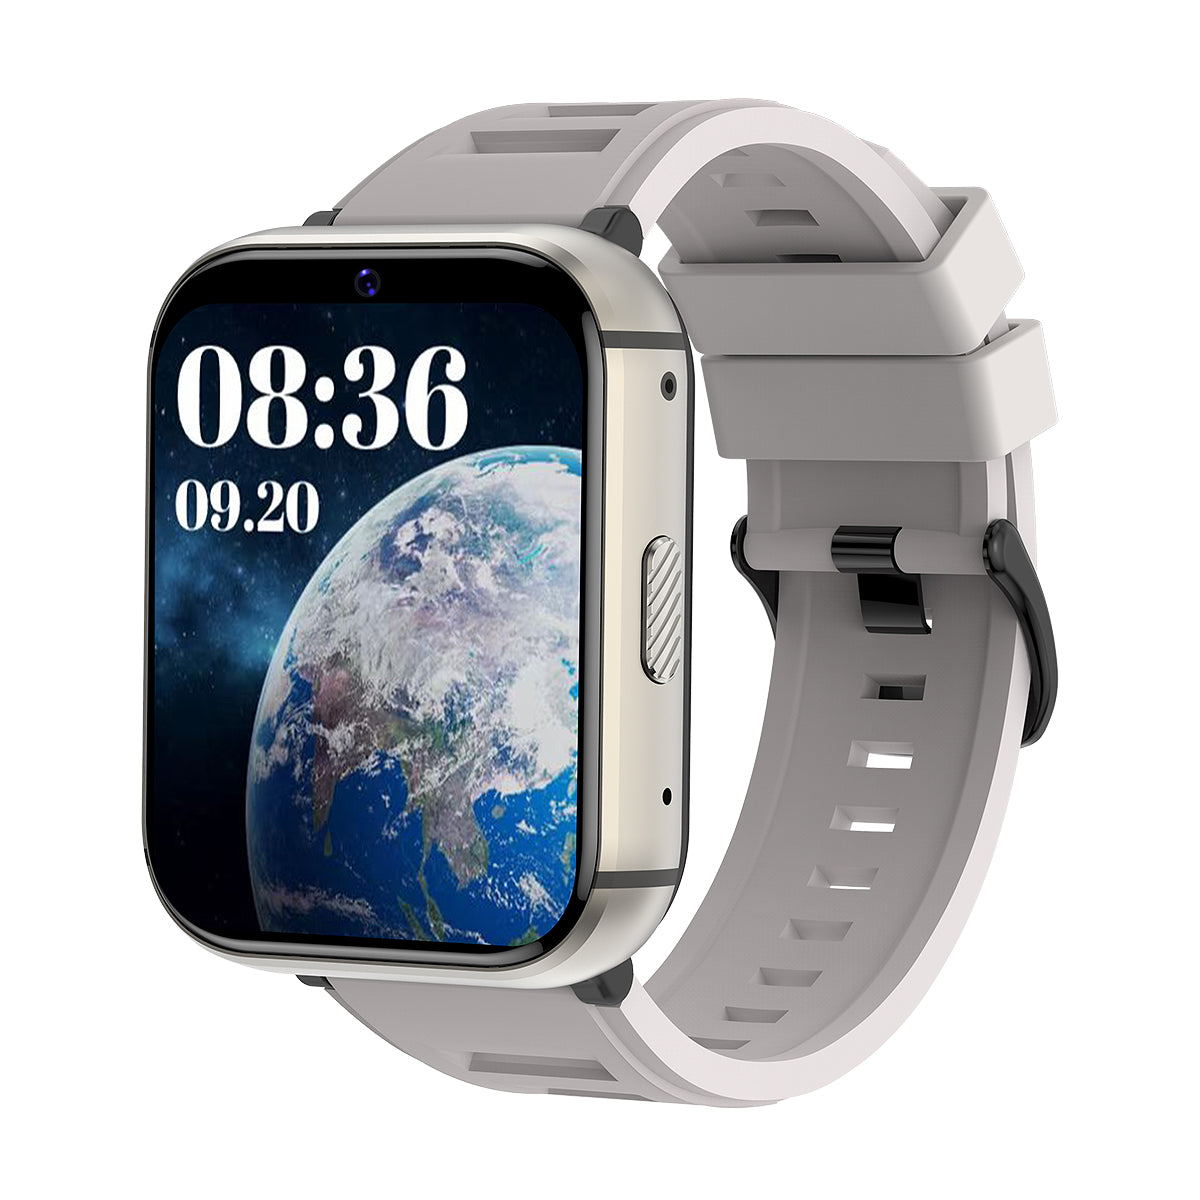 【SACODING】4G Android Smart Watch